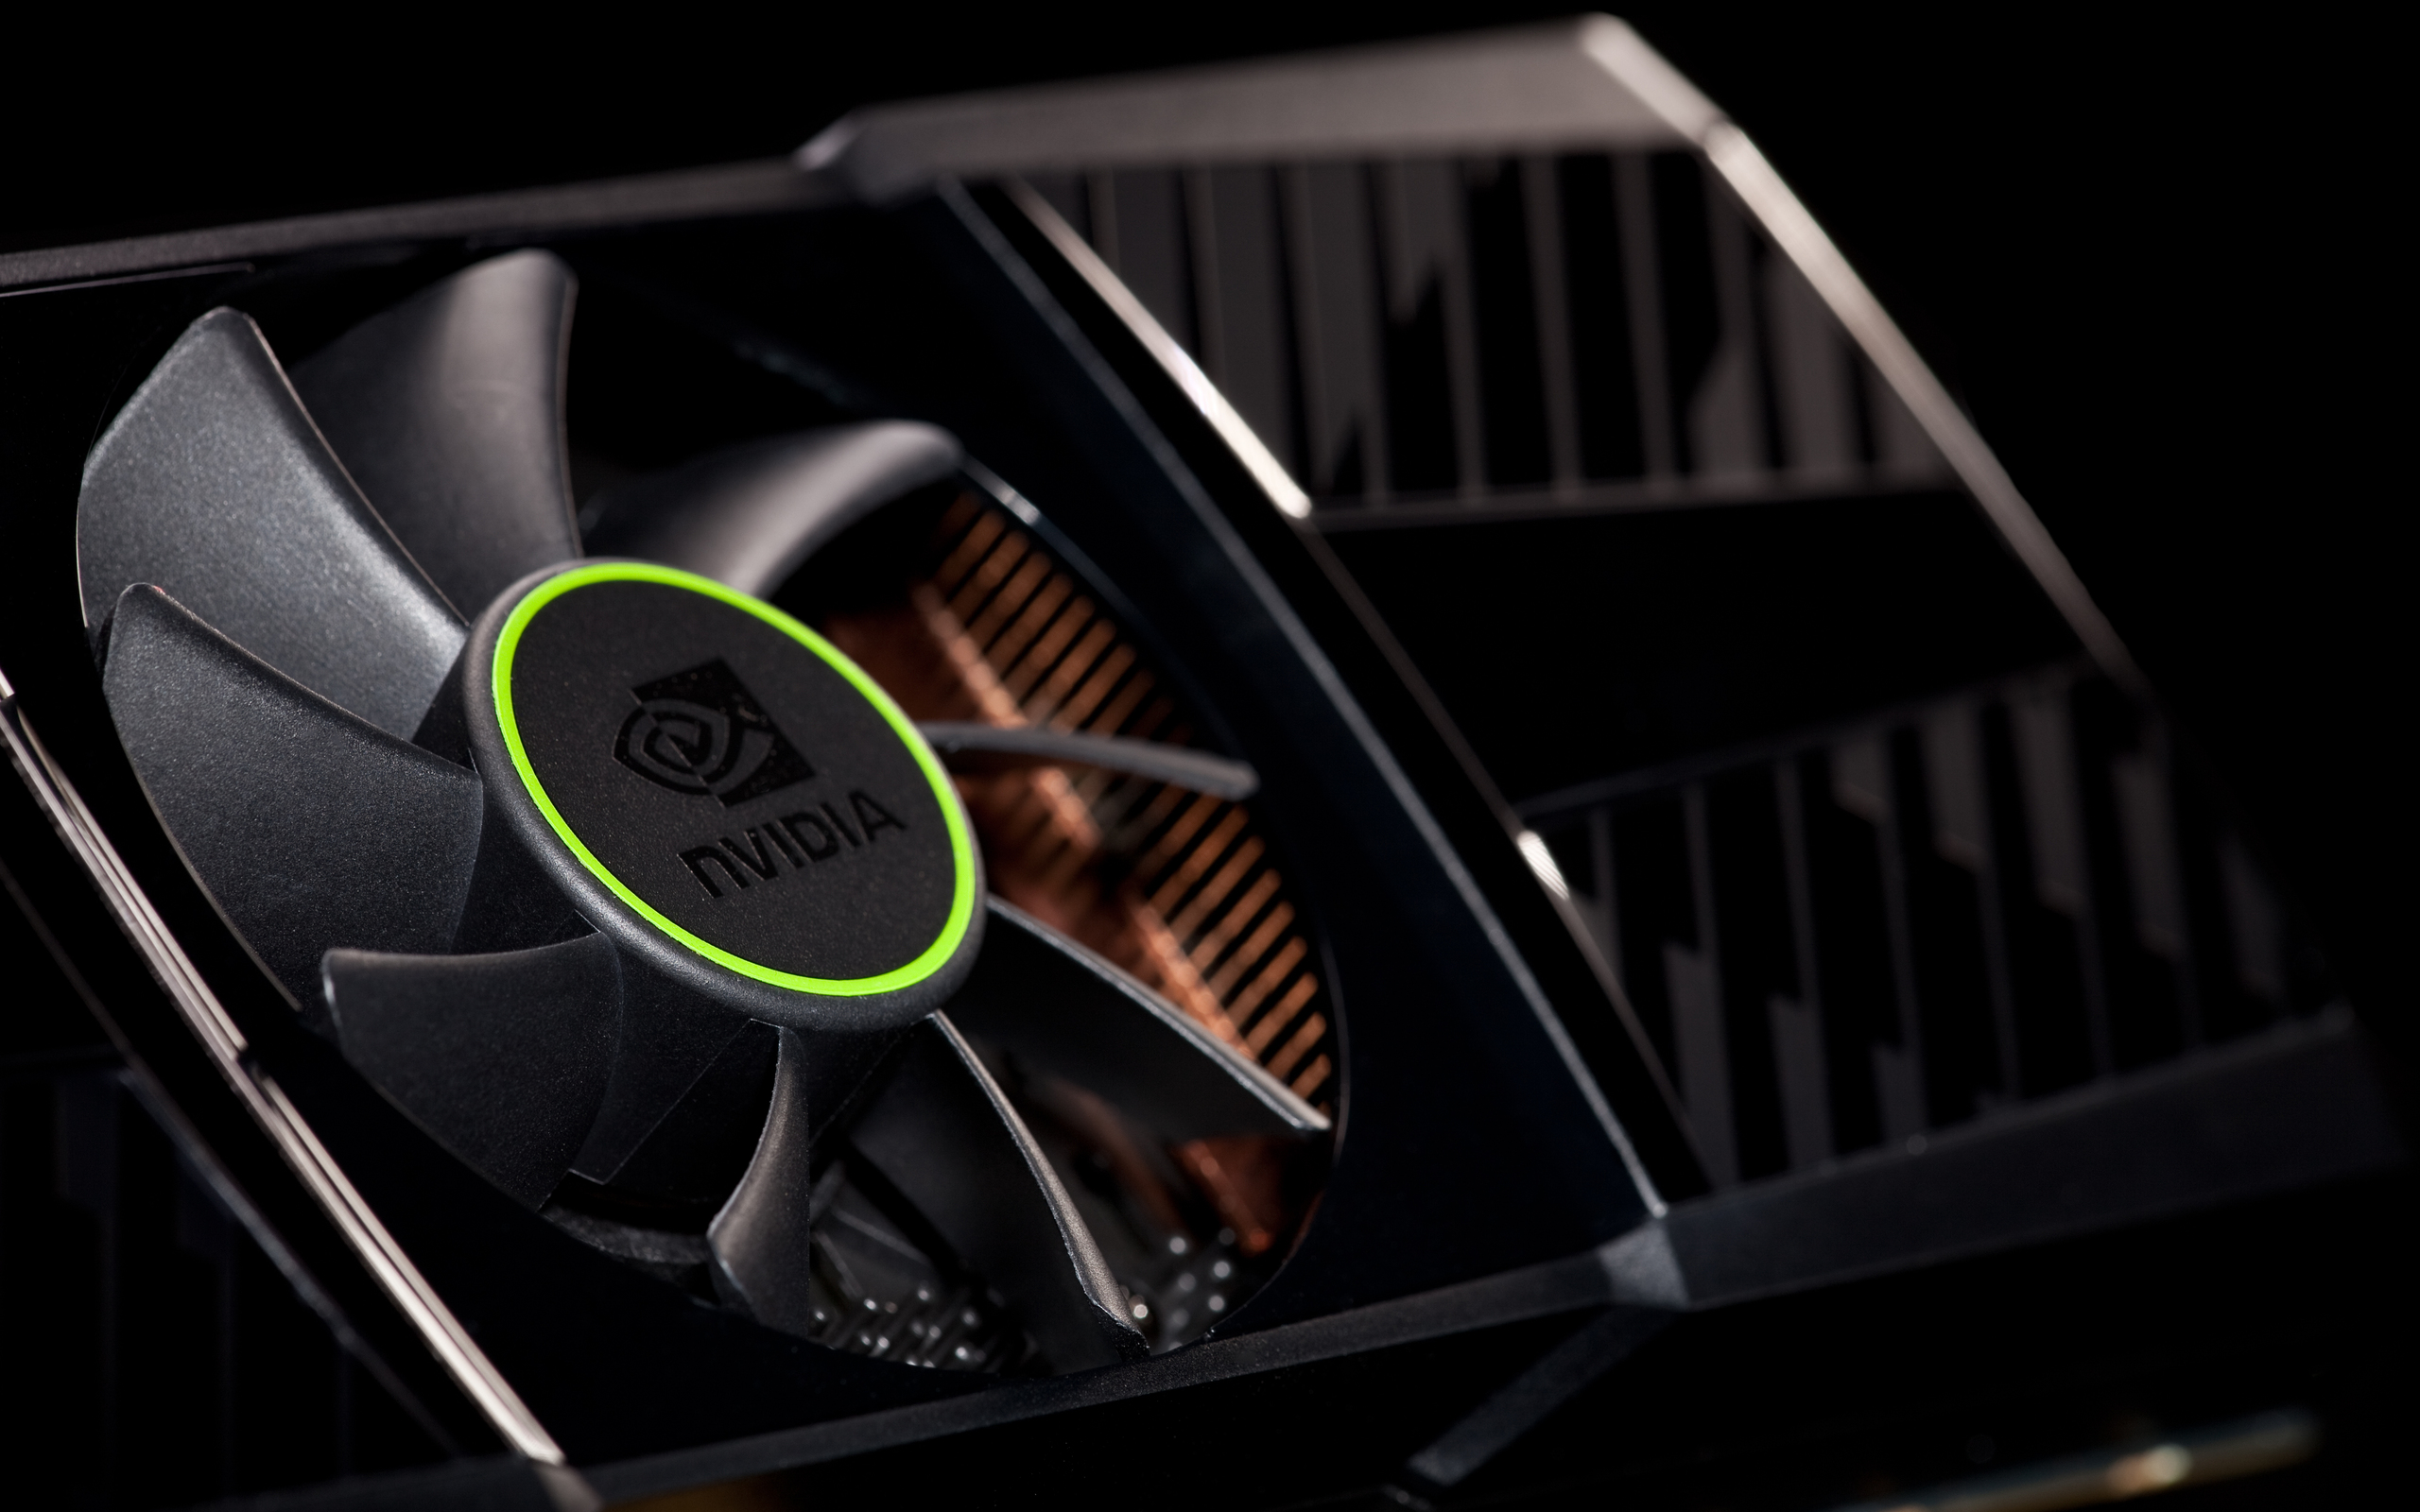 Wallpapers nvidia video card cooler on the desktop